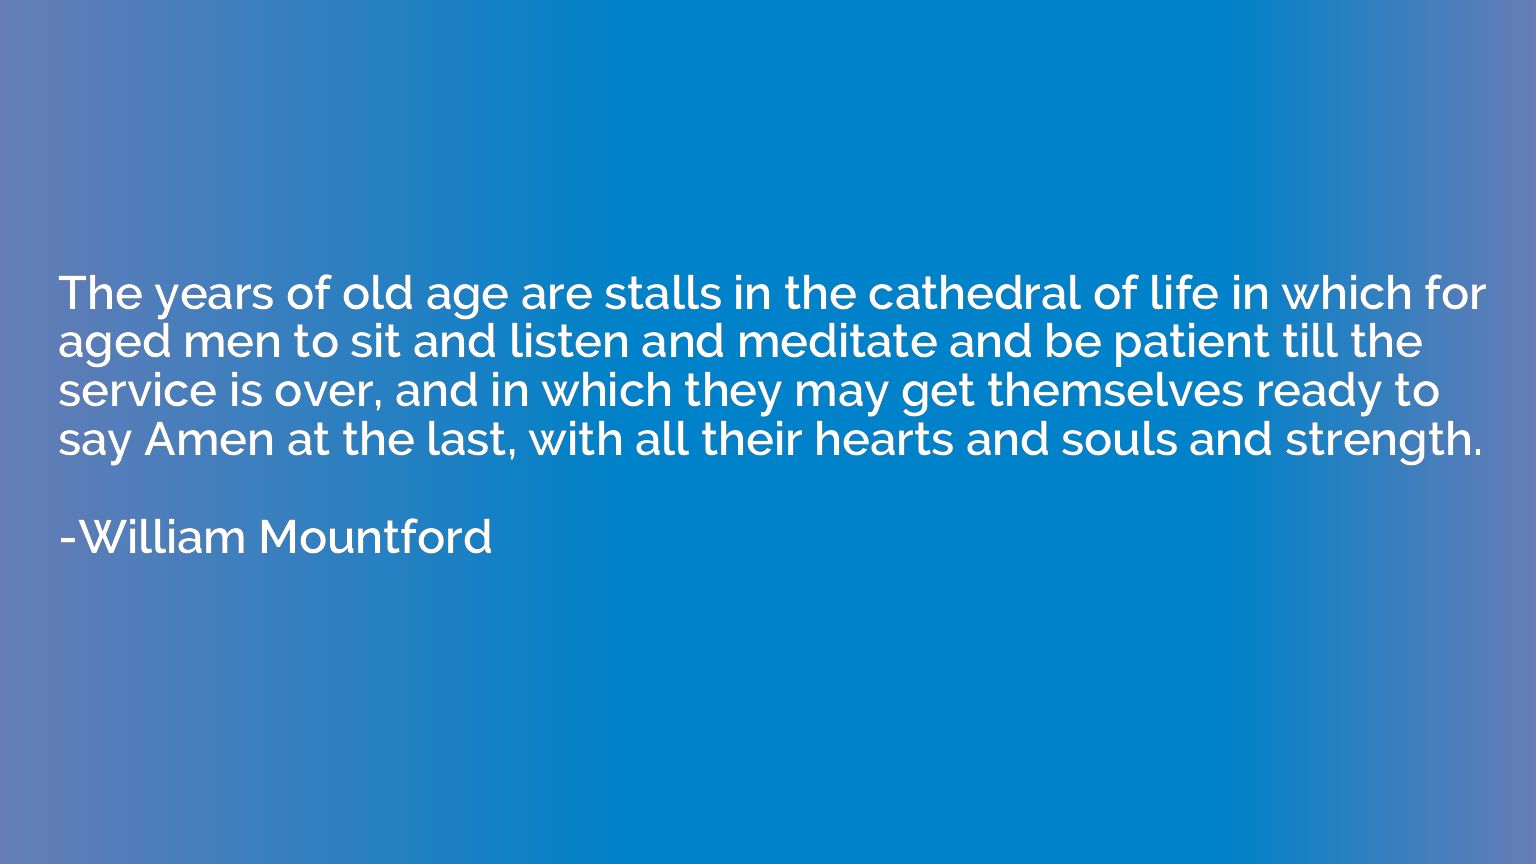 The years of old age are stalls in the cathedral of life in 